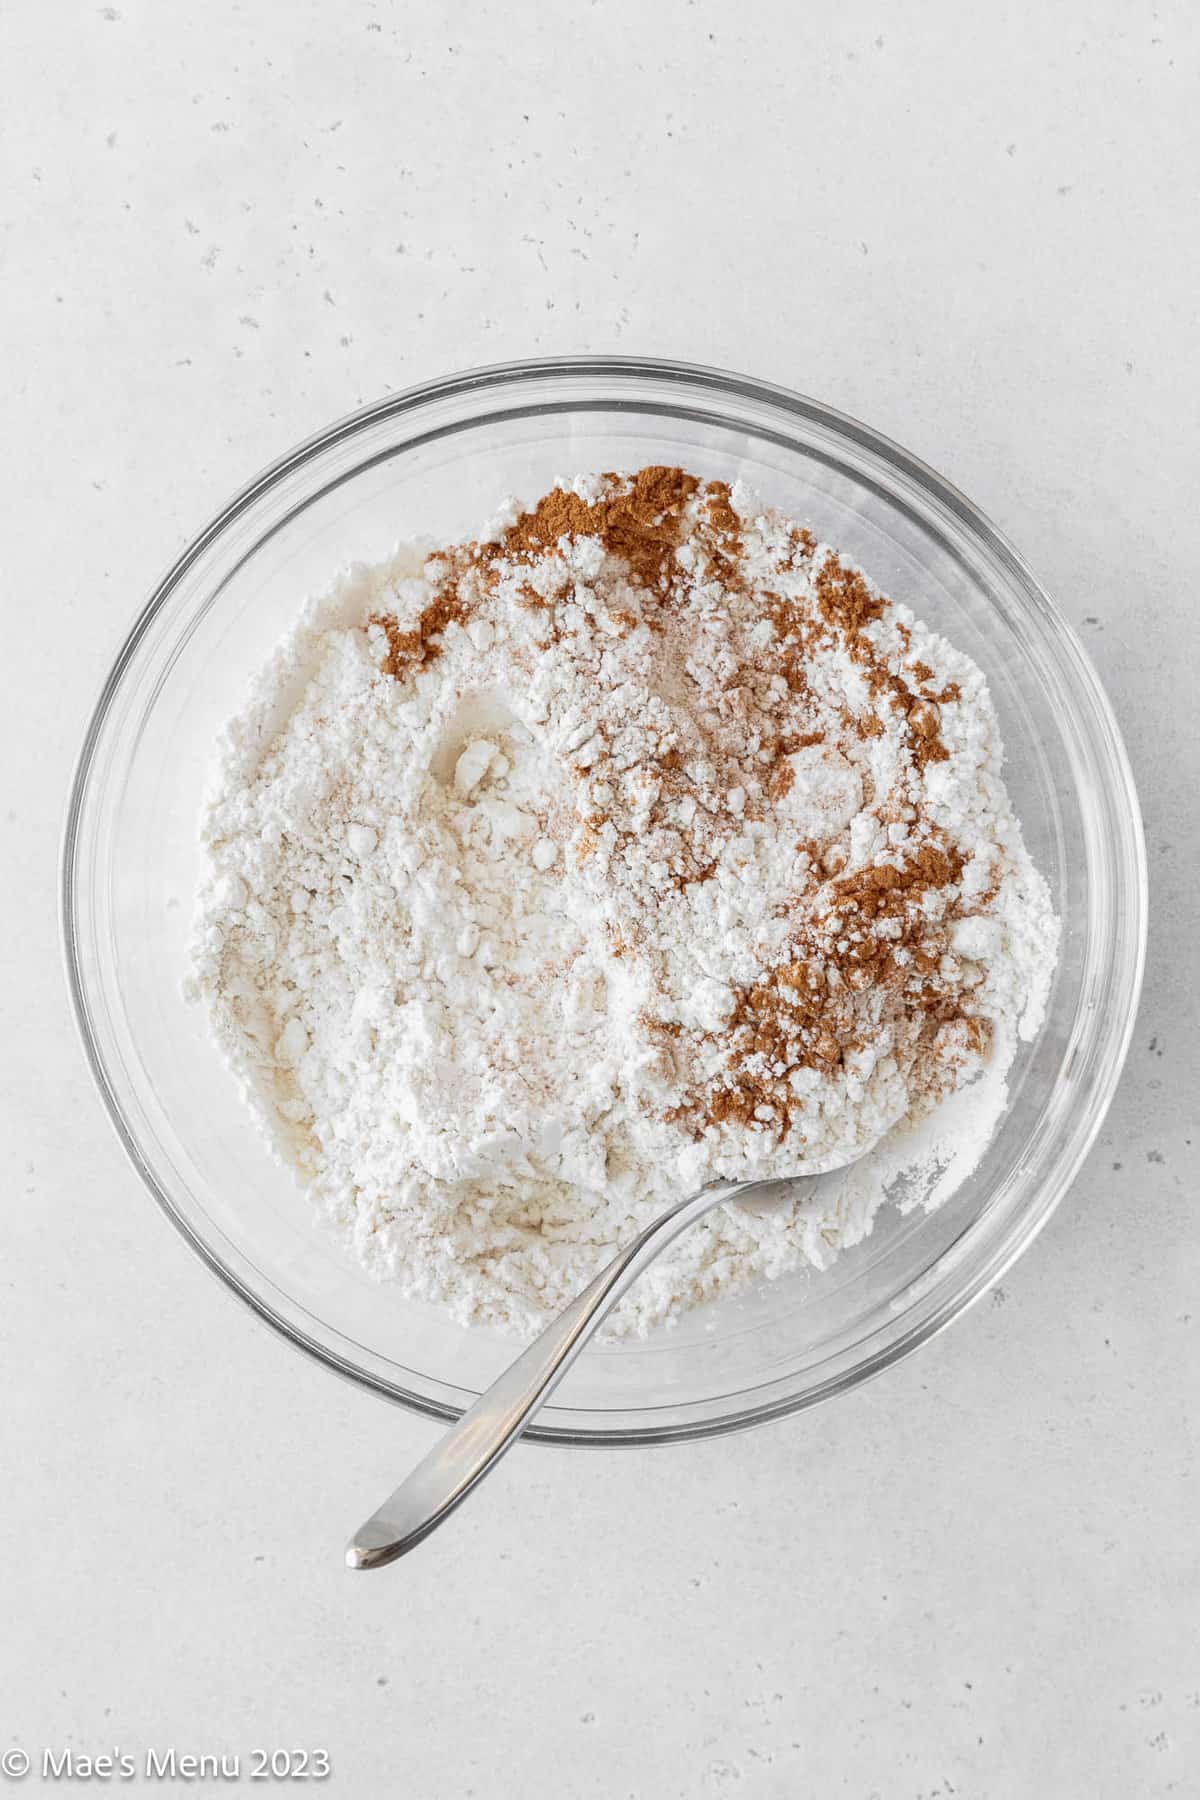 A glass bowl of flour and cinnamon with a spoon.